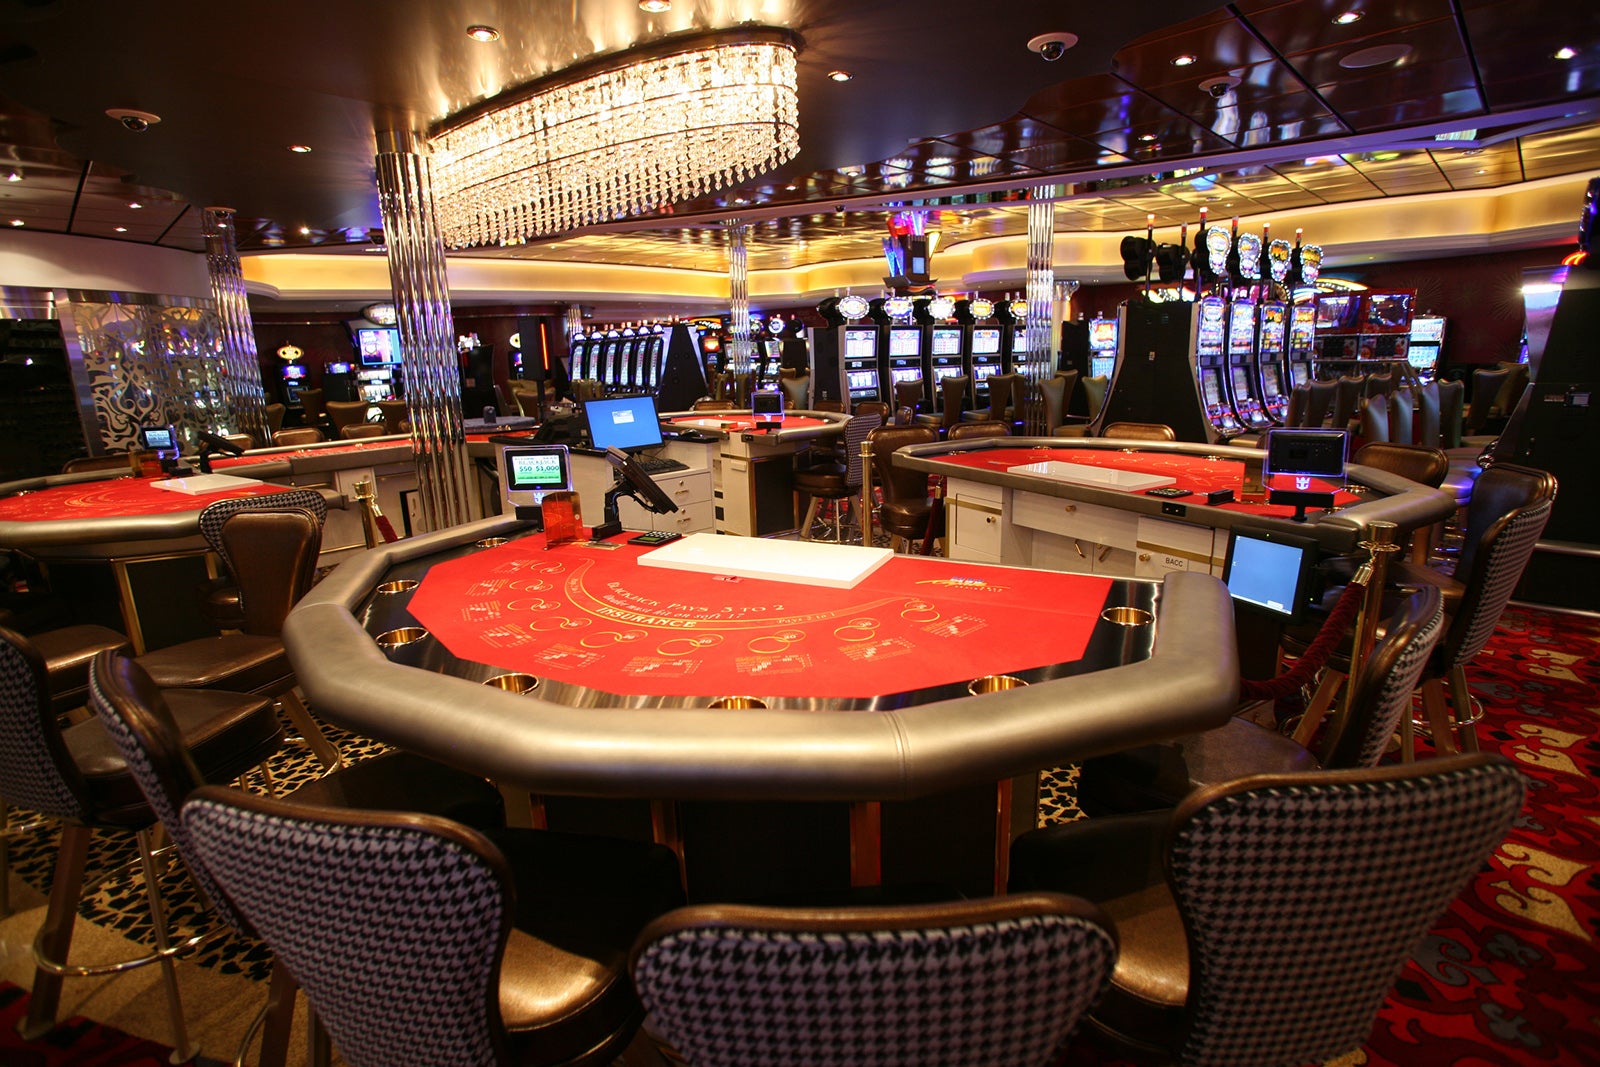 Casino on Royal Caribbean's Allure of the Seas cruise ship